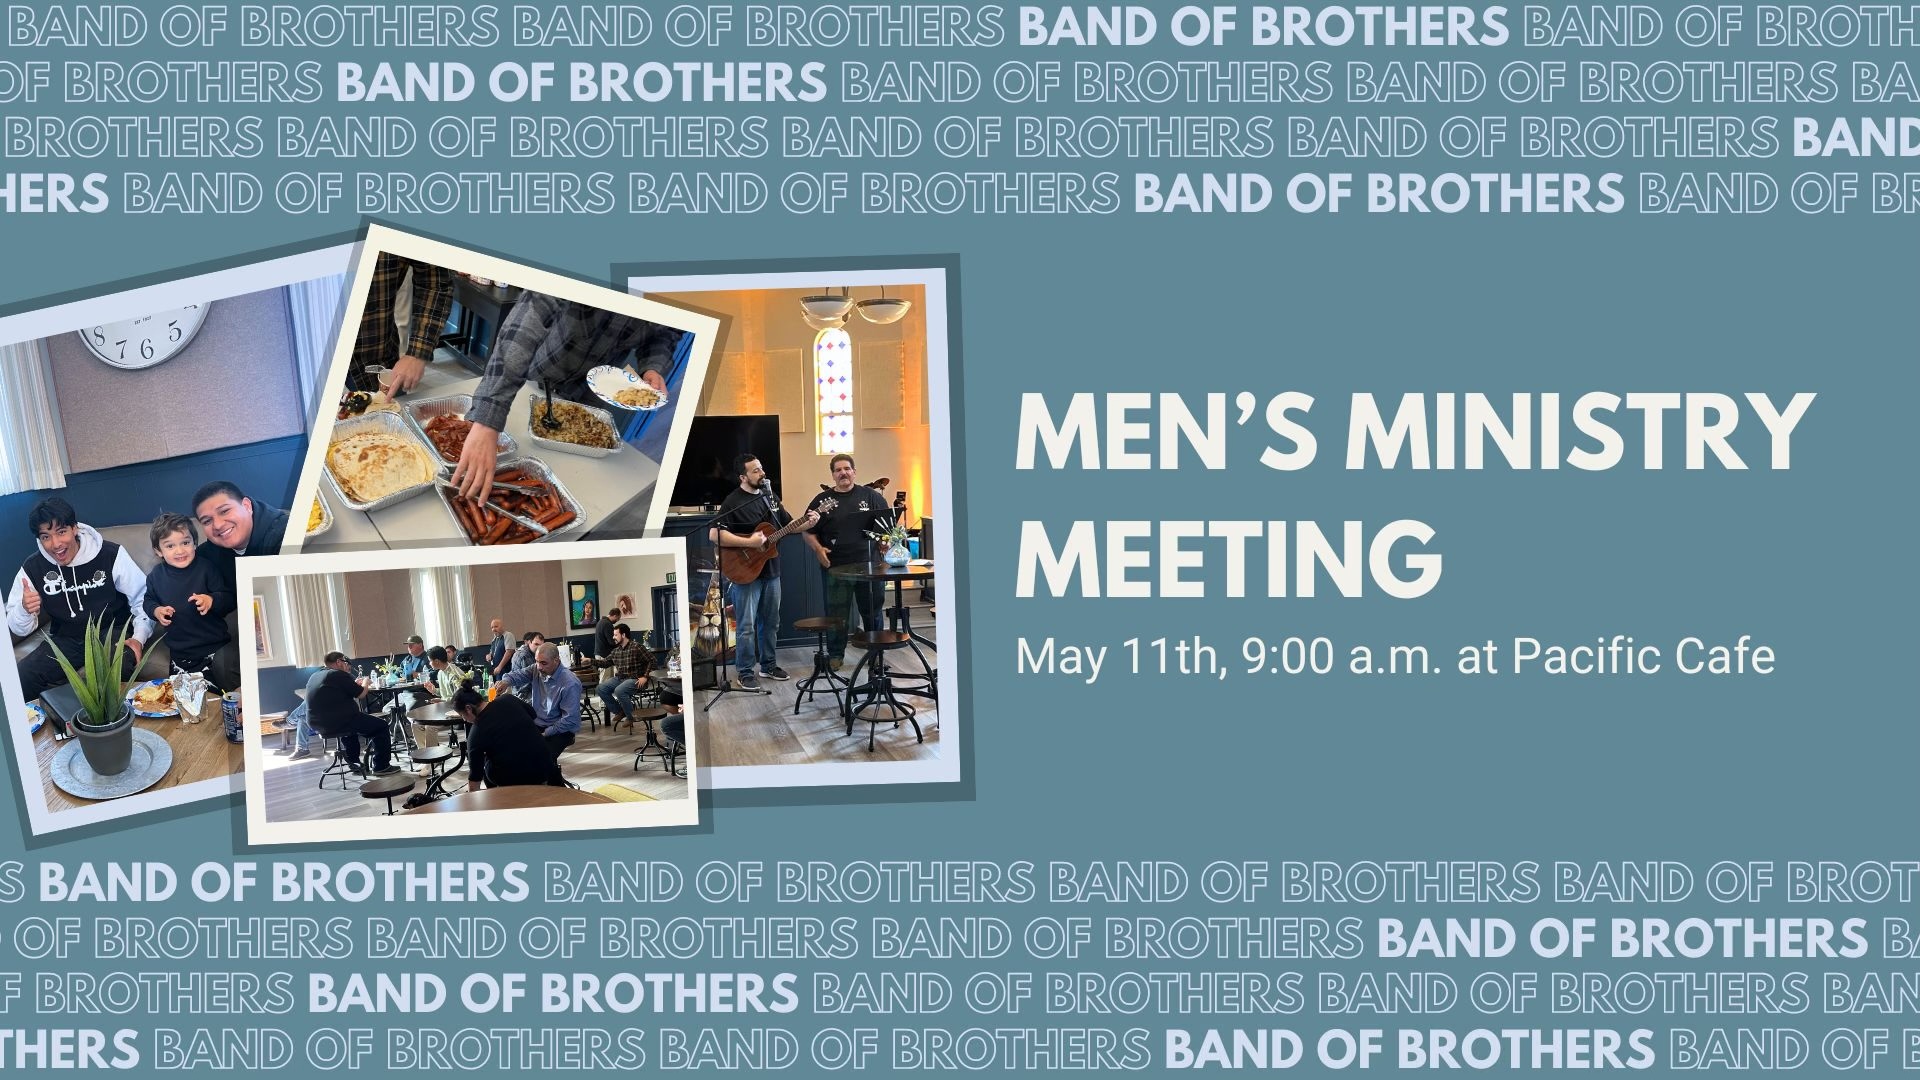 Men’s Ministry Meeting May 11th 9am